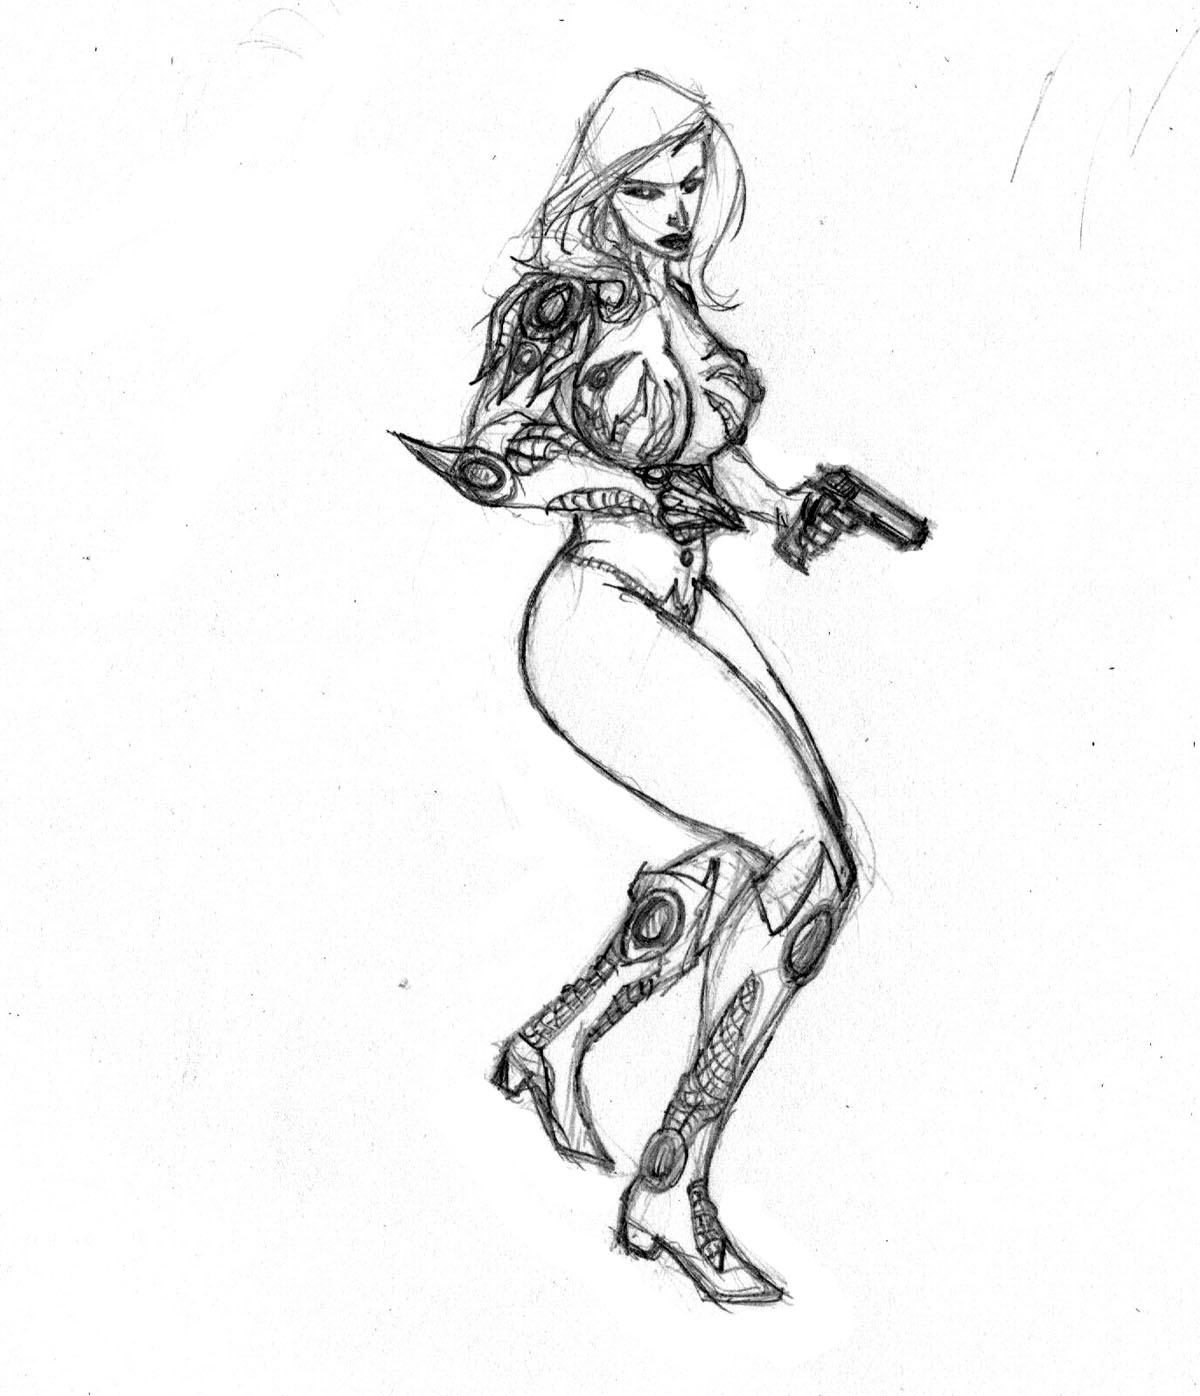 witchblade still with a gun... by Selkirk